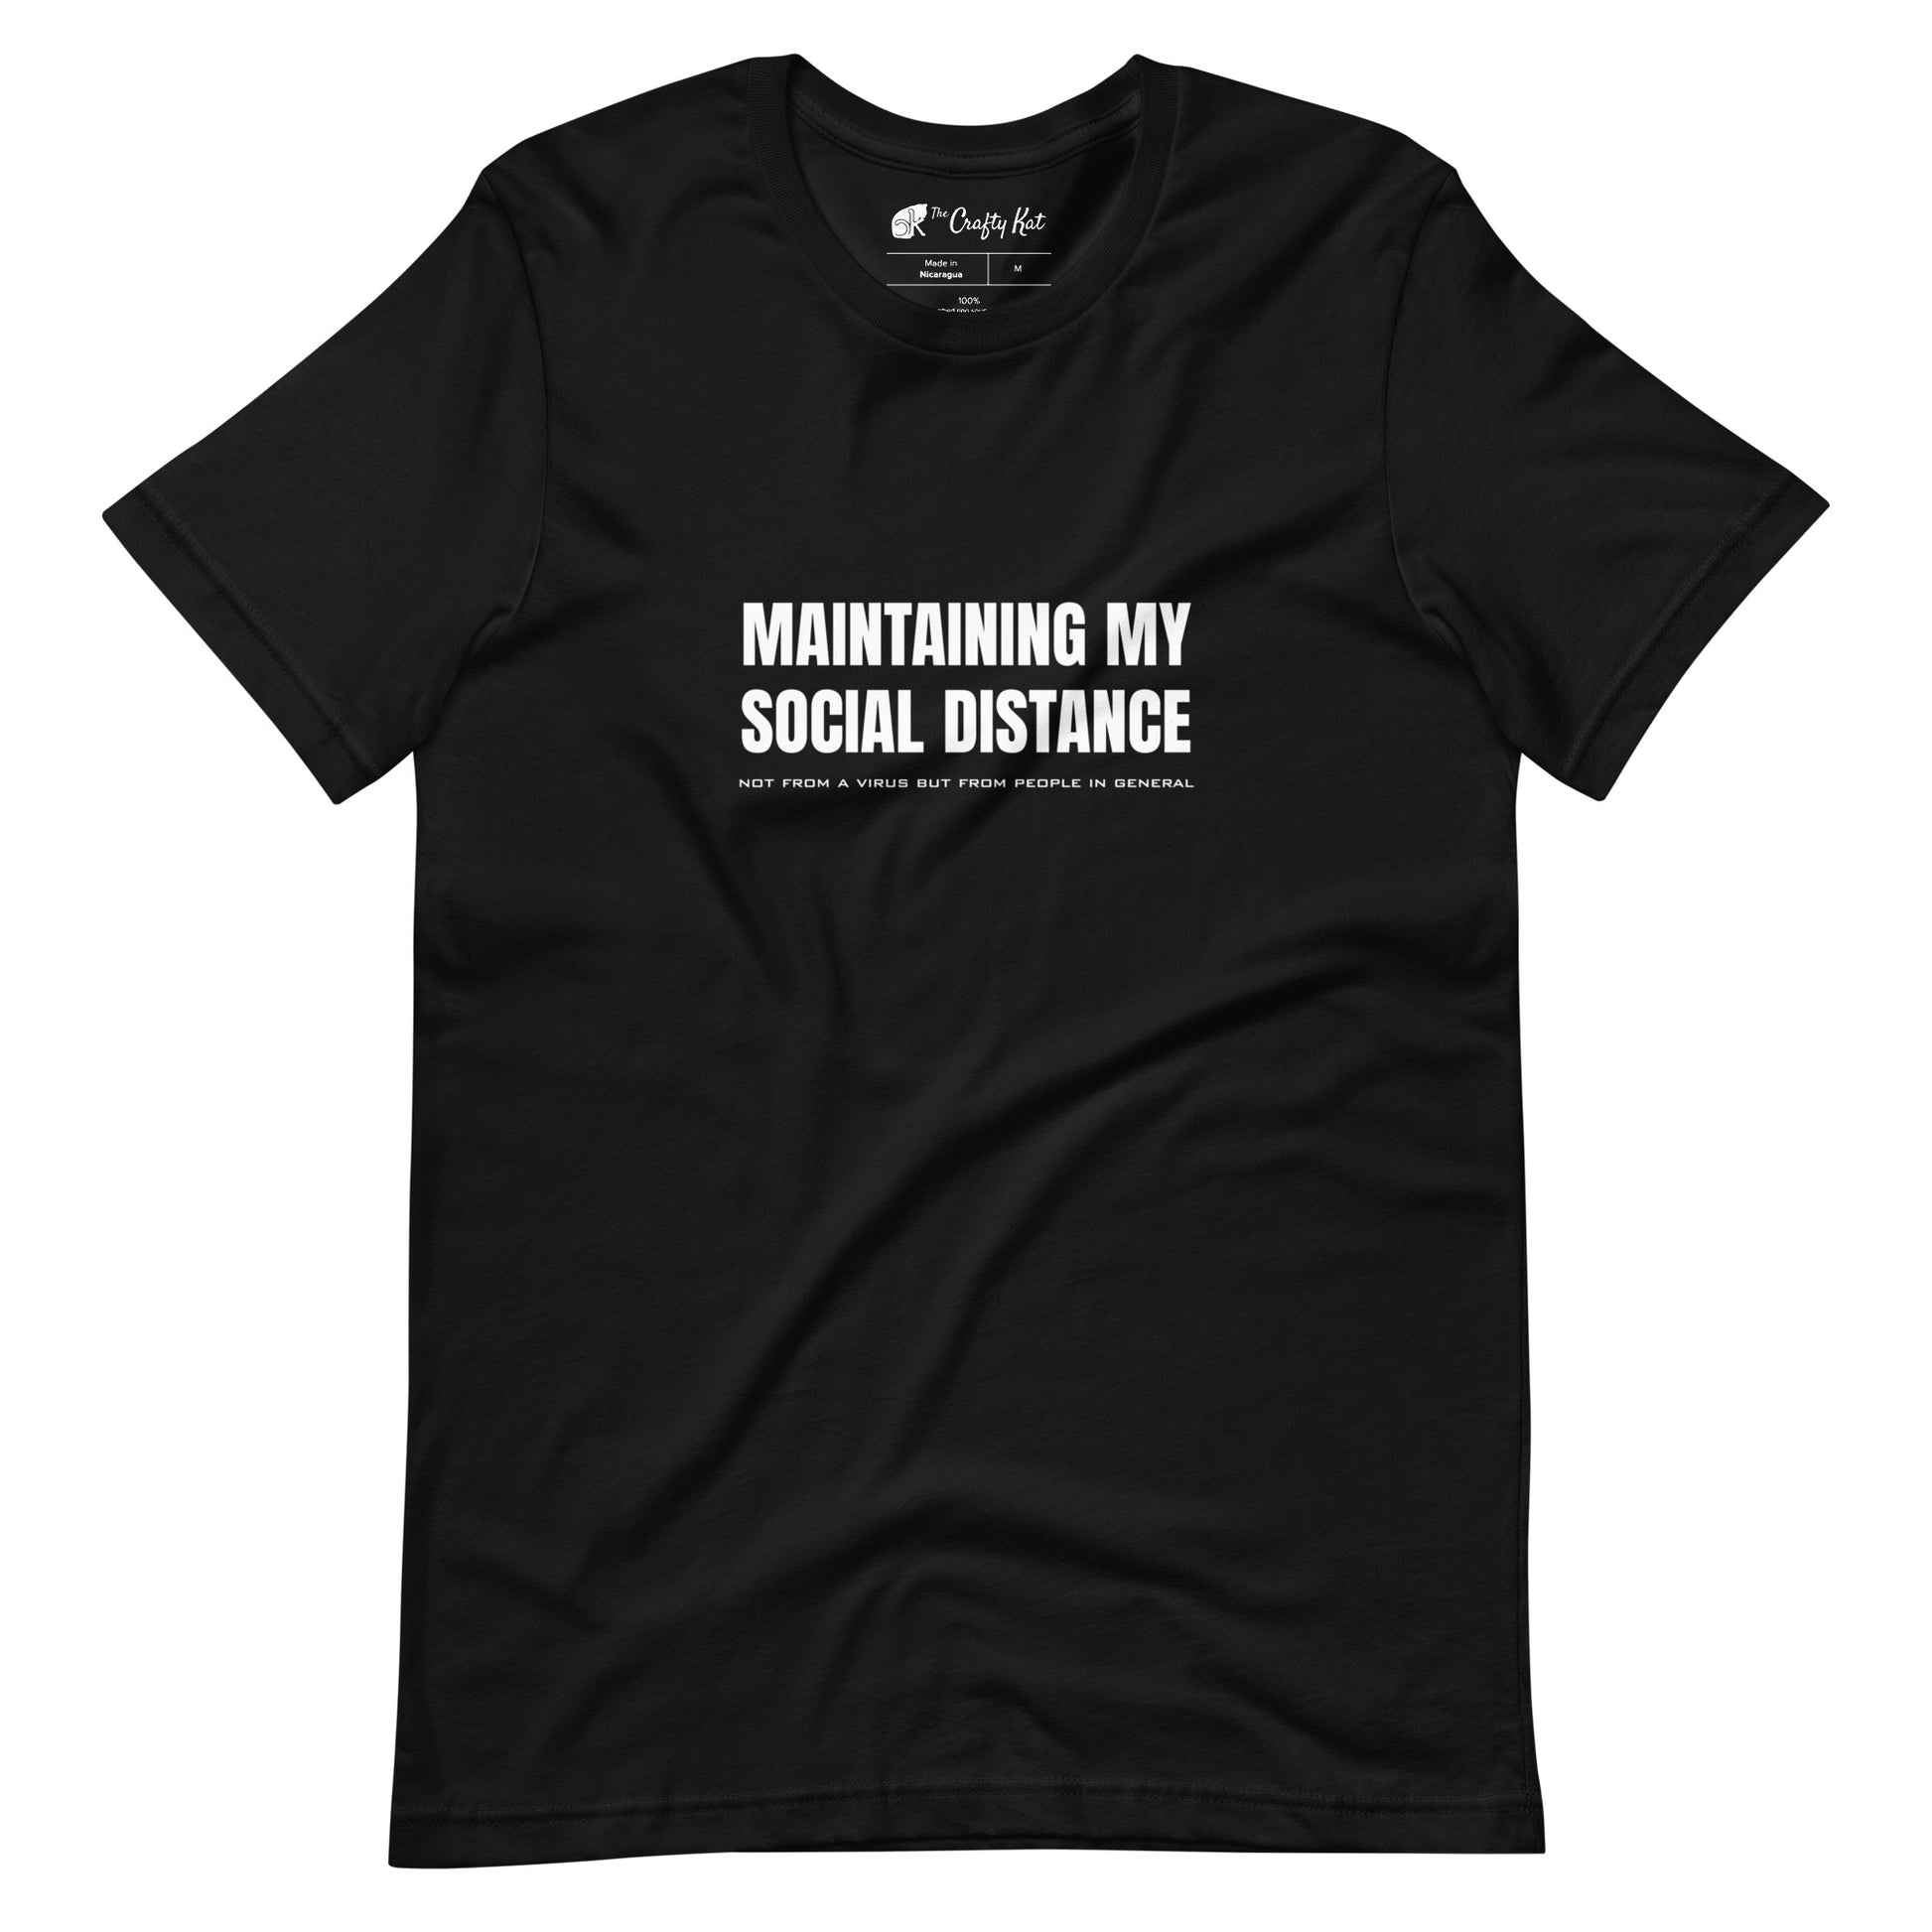 Black t-shirt with white graphic: "MAINTAINING MY SOCIAL DISTANCE not from a virus but from people in general"